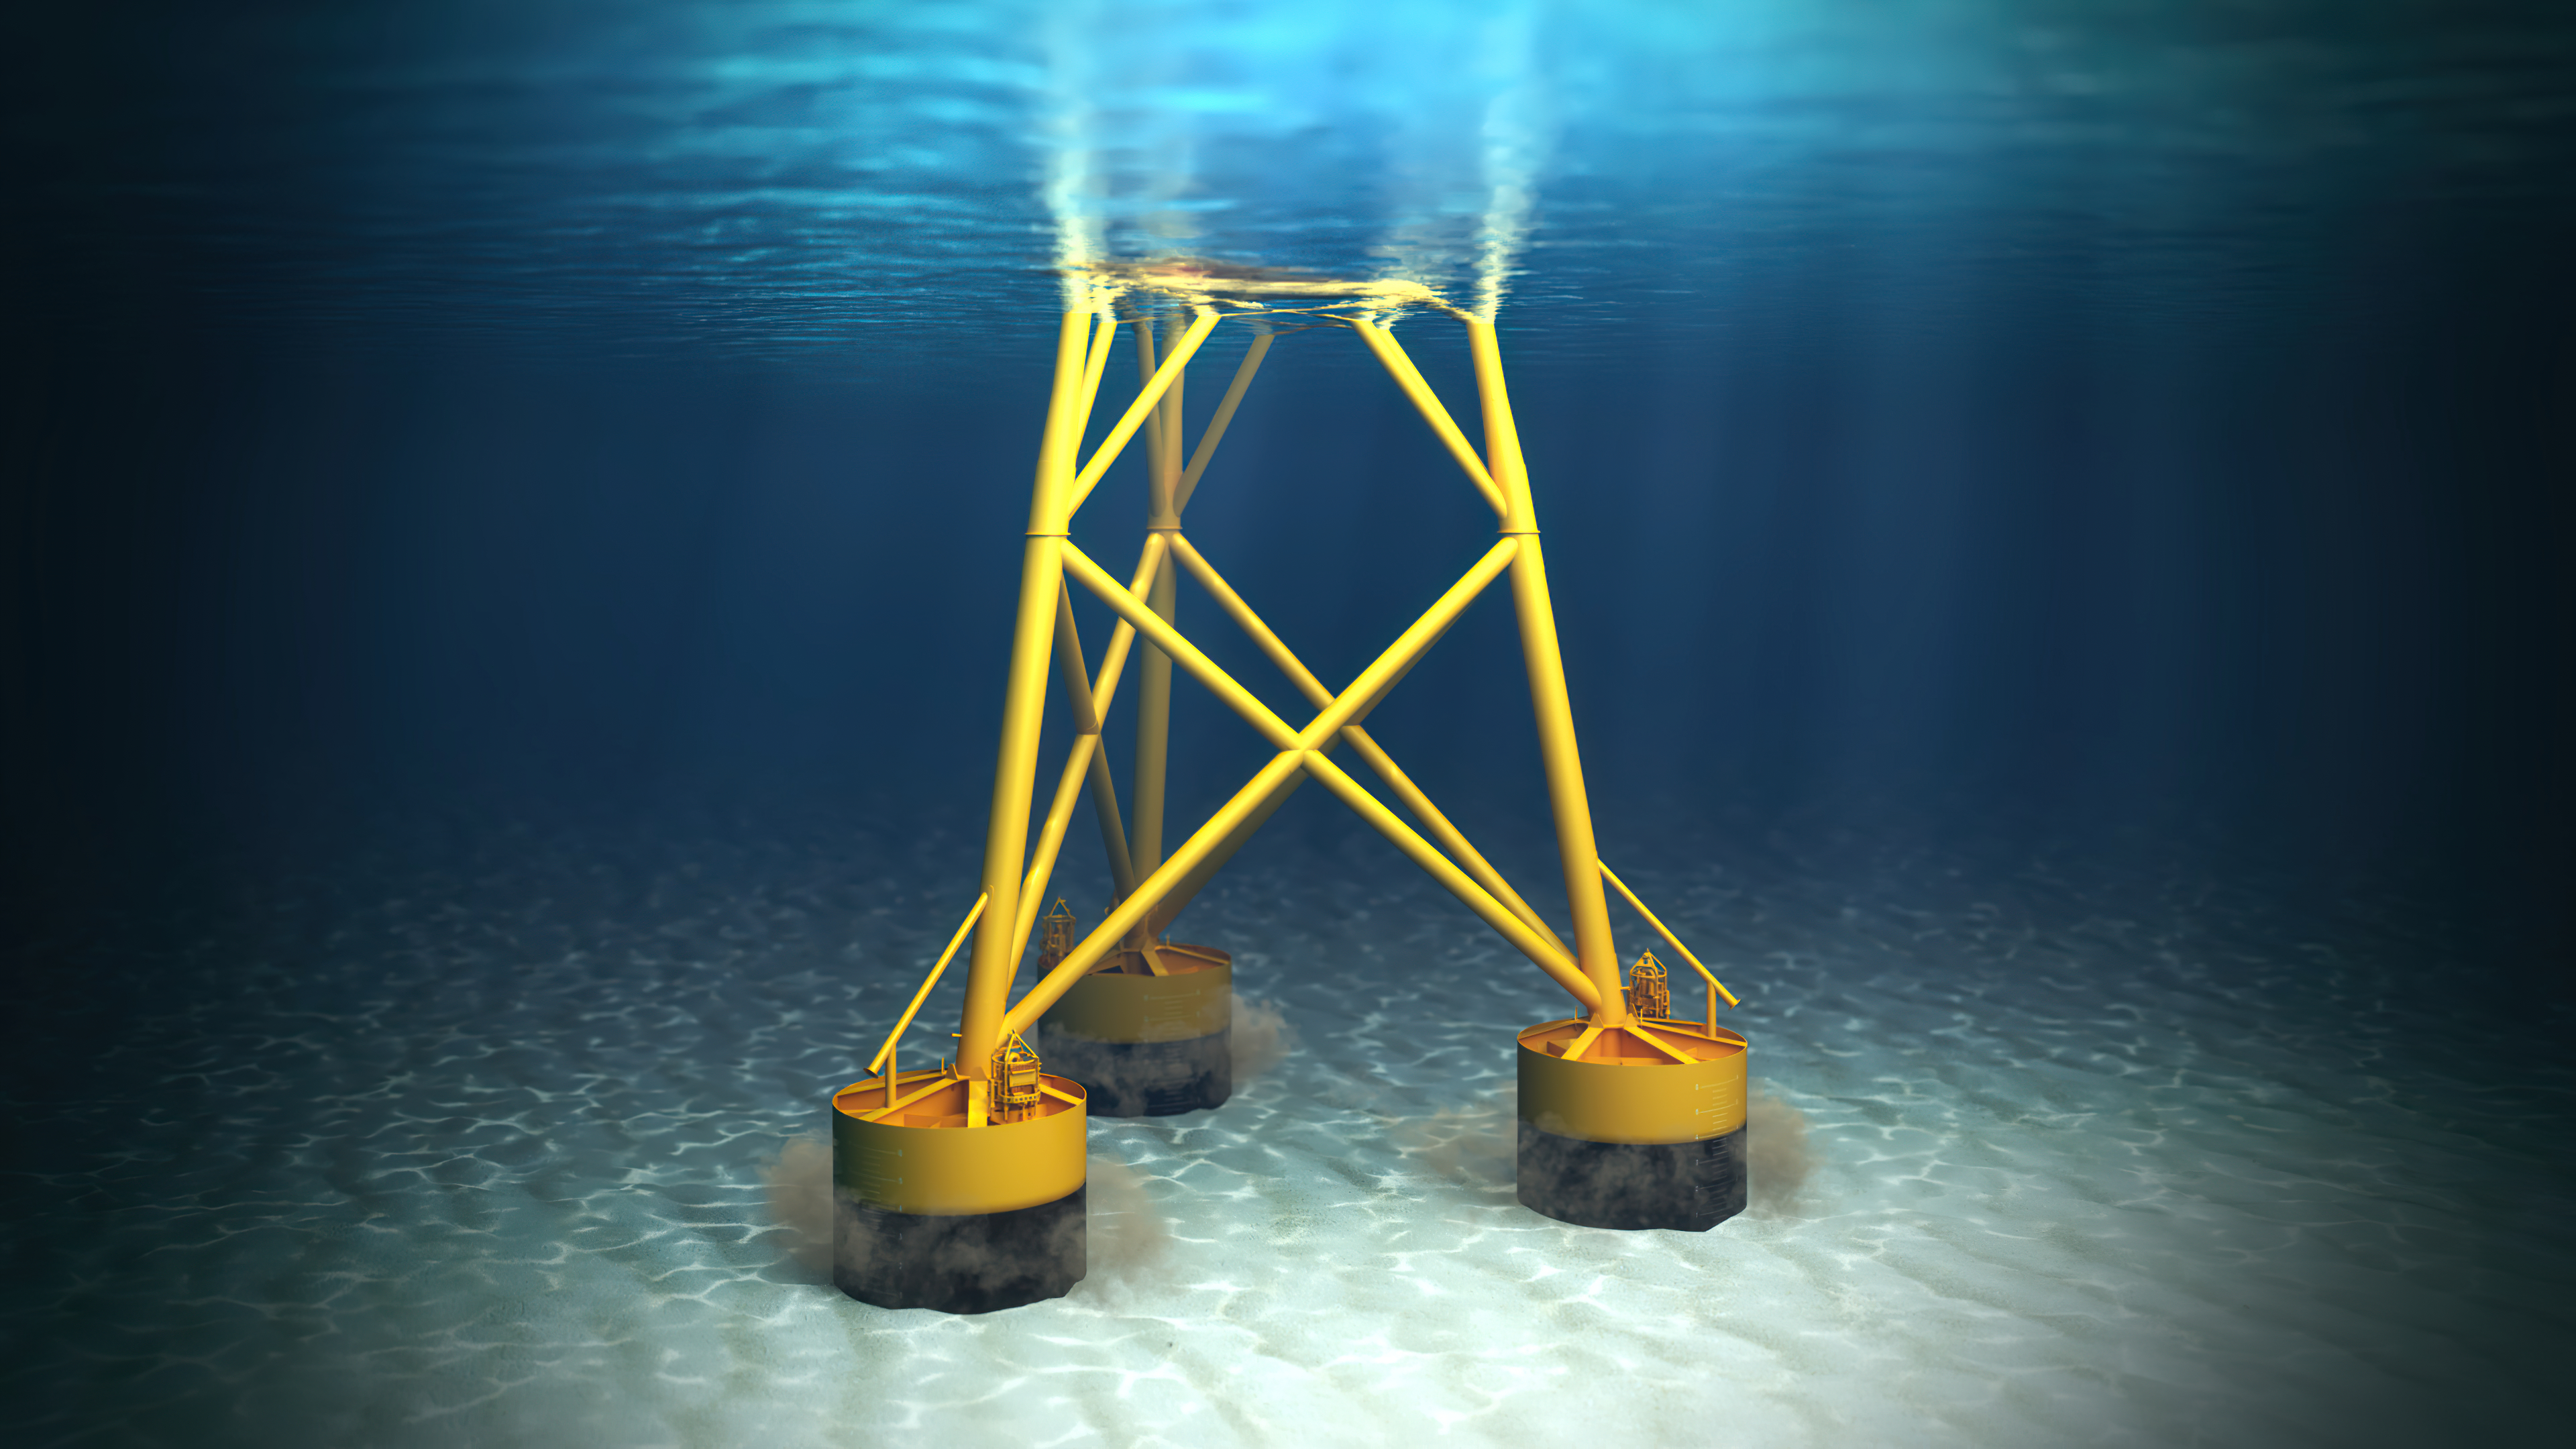 Framo Pumps for Scotland's Largest Offshore Wind Project